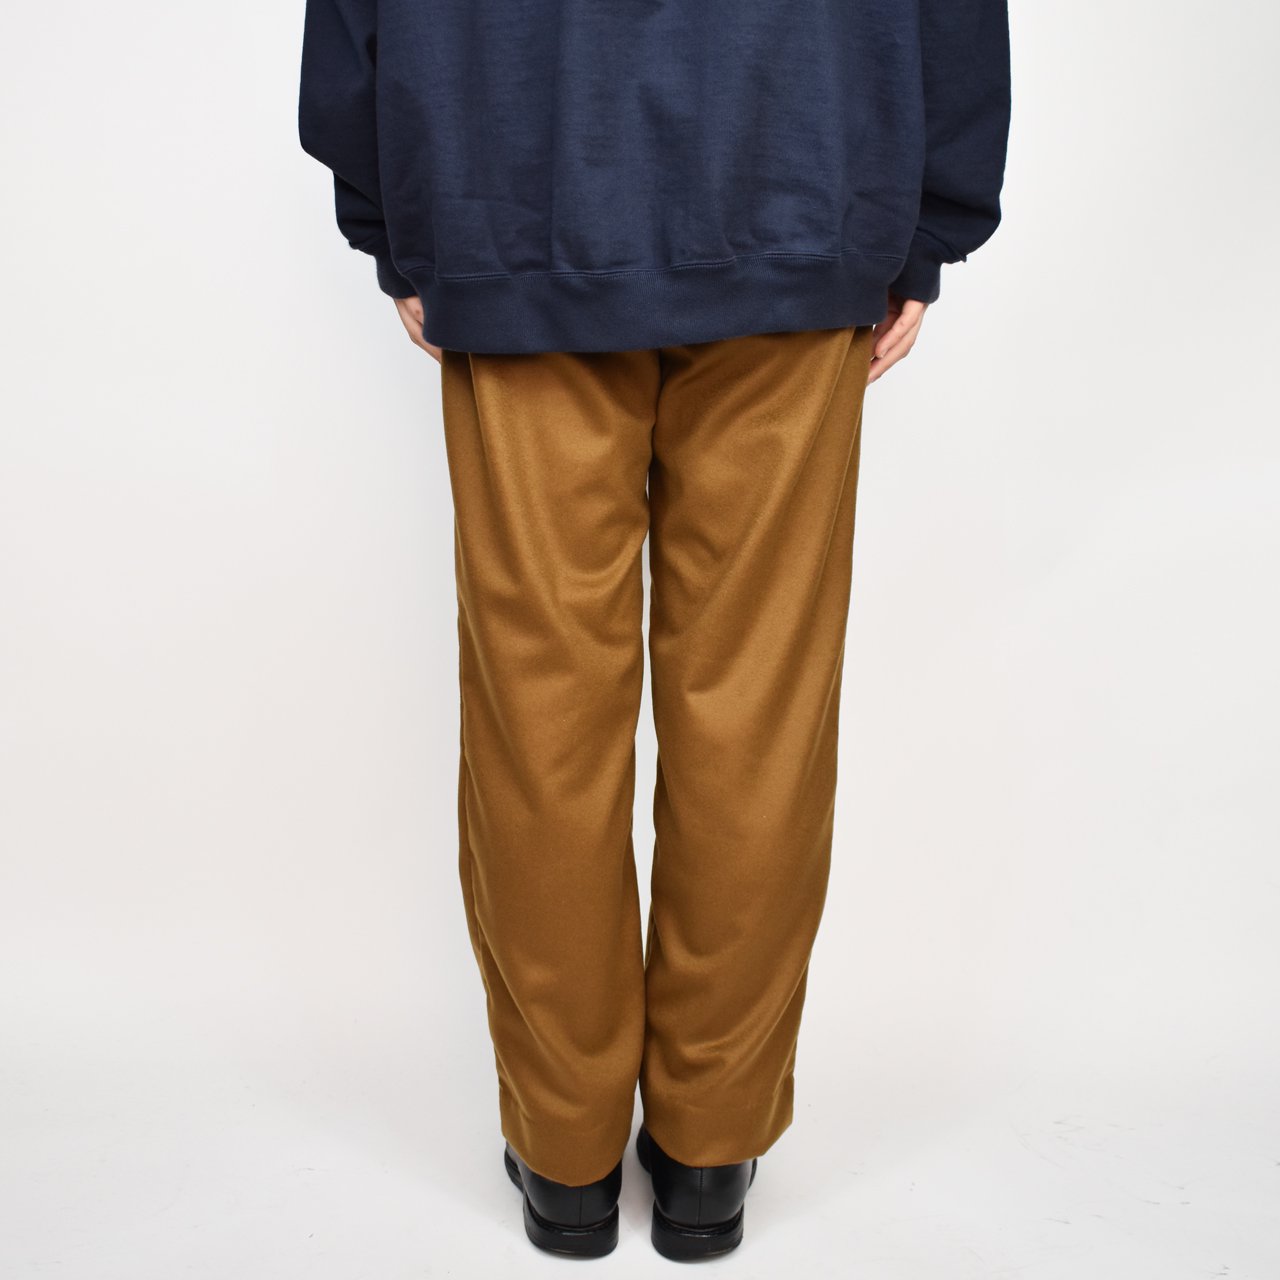 40%OFF MARKAWARE (マーカウェア)｜CASHMERE TROUSERS BROWN KHAKI -CASHMERE FLANNEL-